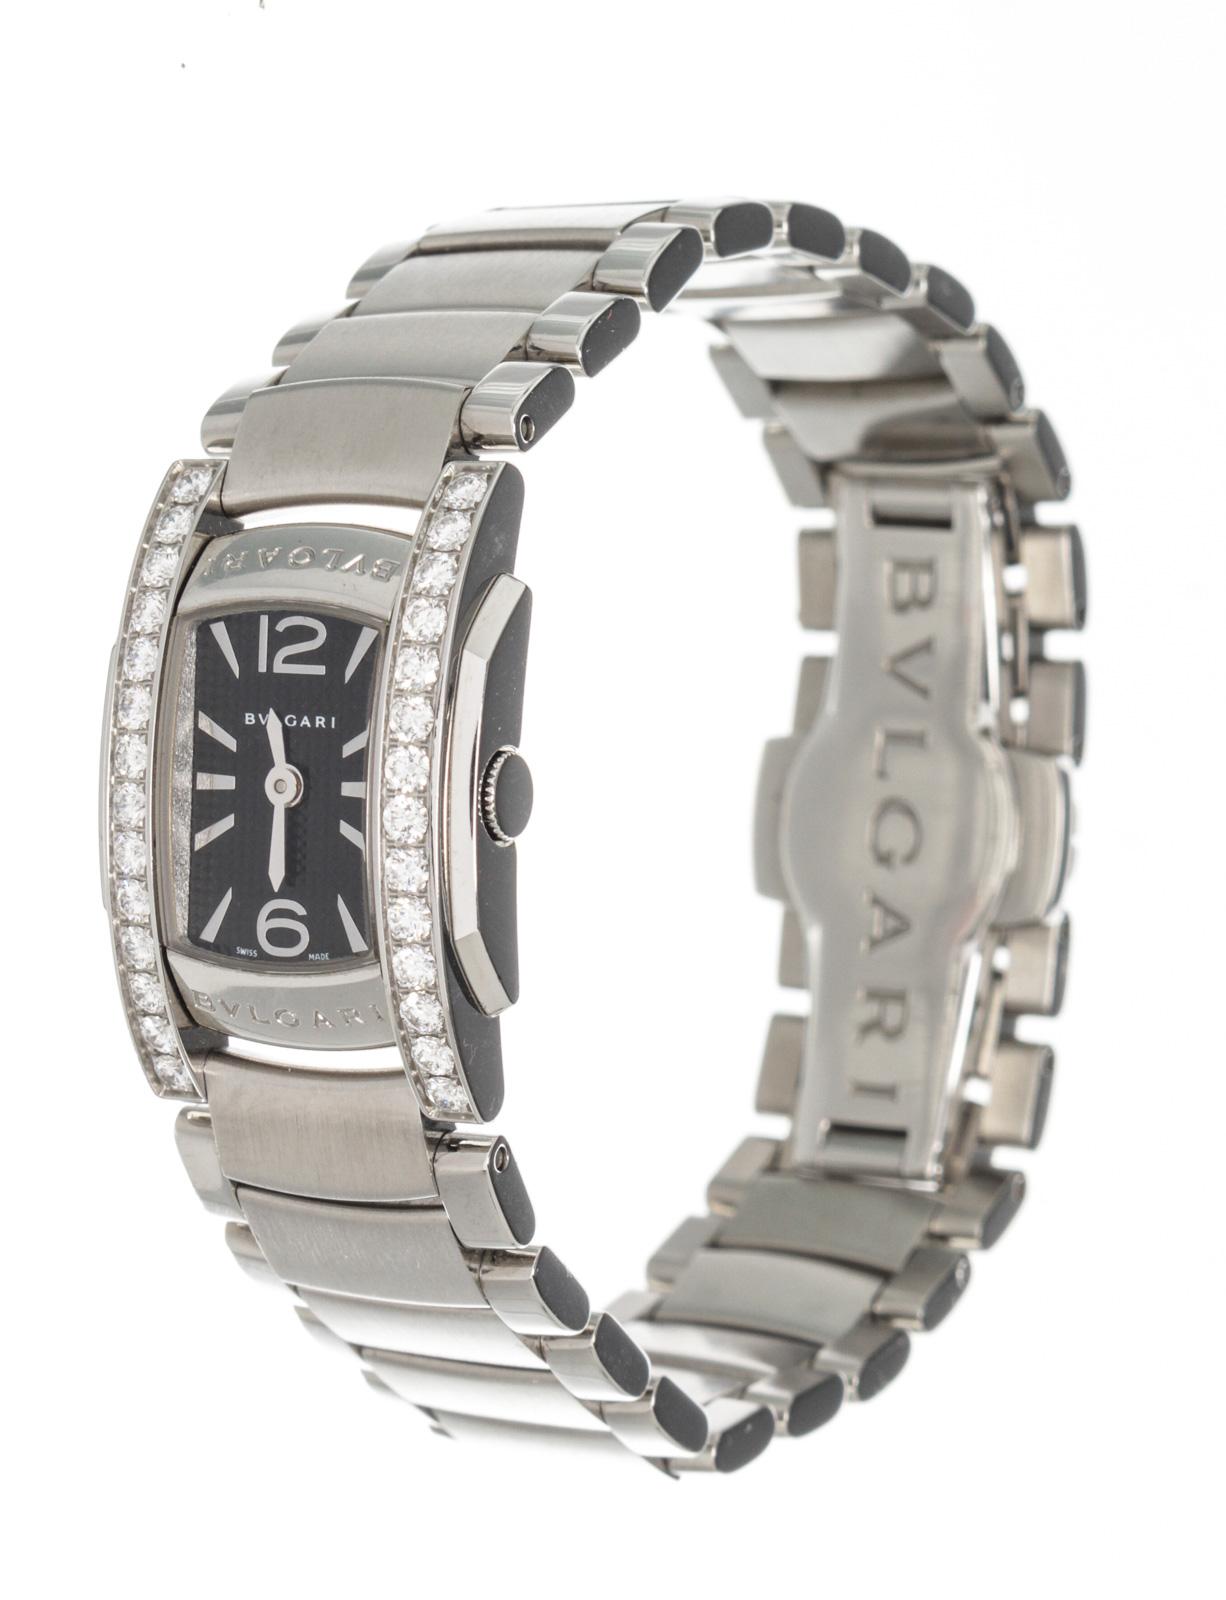 Bvlgari White Gold Assioma D Watch with stainless steel band and diamonds on face.

50051MSC